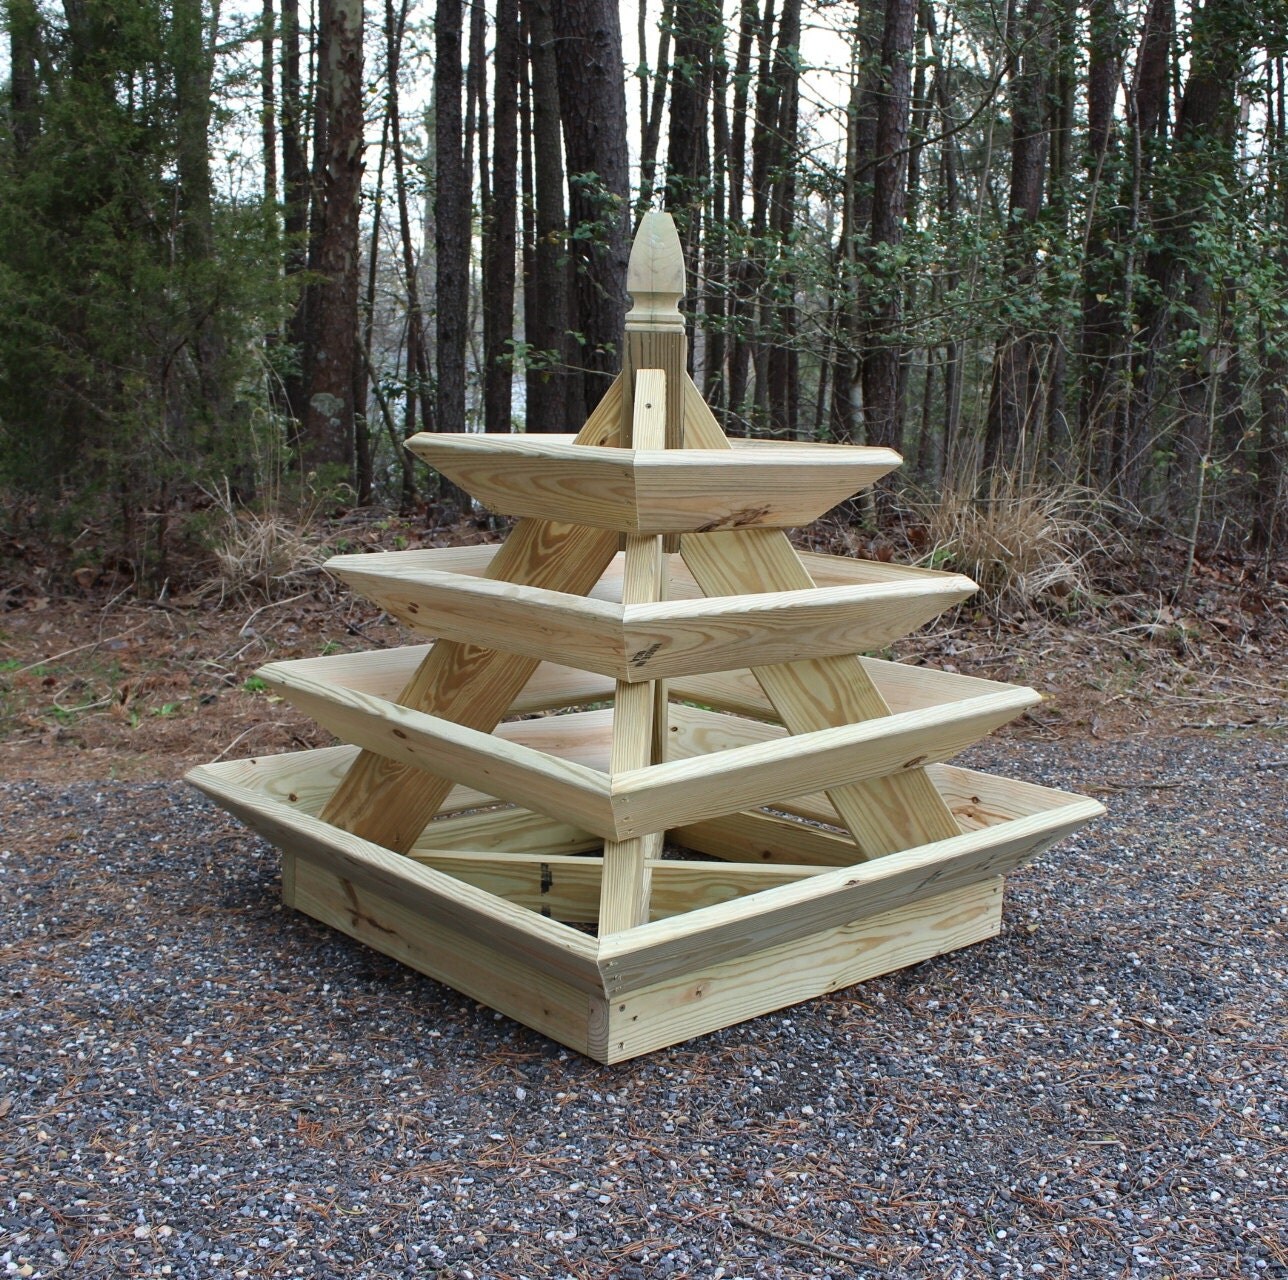 Woodworking Plans Pyramid Planter Illustrated with Photos